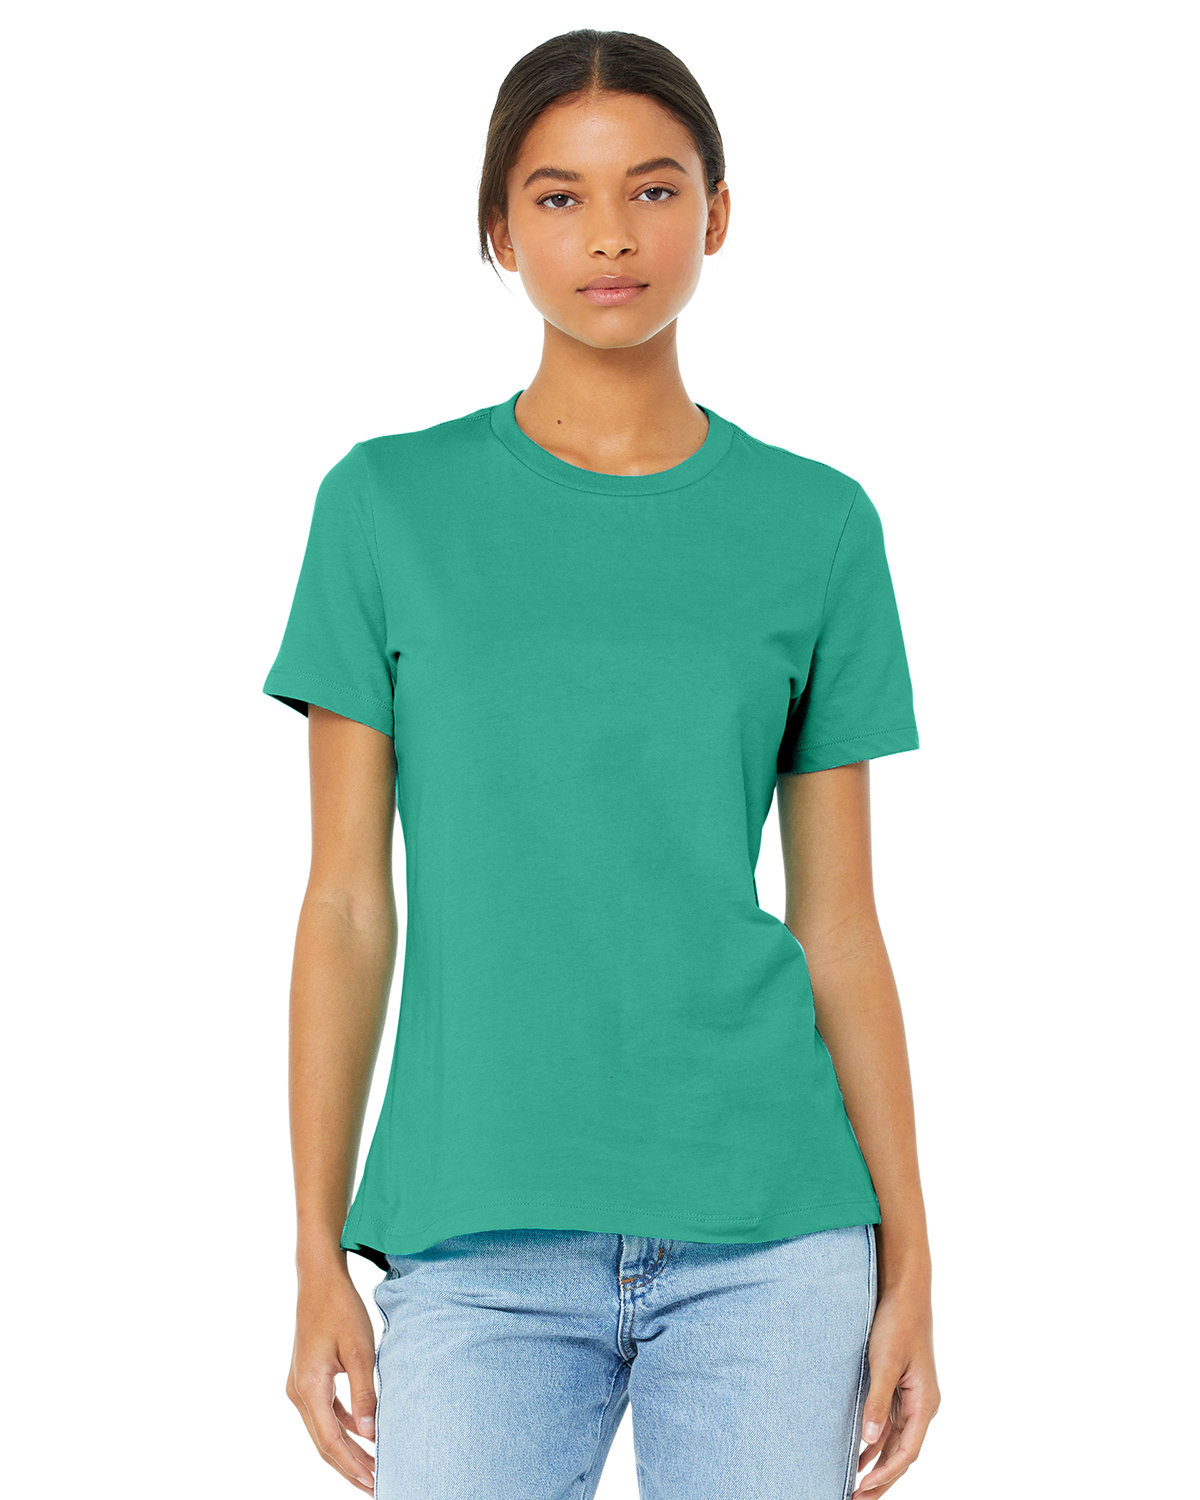 Bella + Canvas Ladies' Relaxed Jersey Short-Sleeve T-Shirt TEAL 